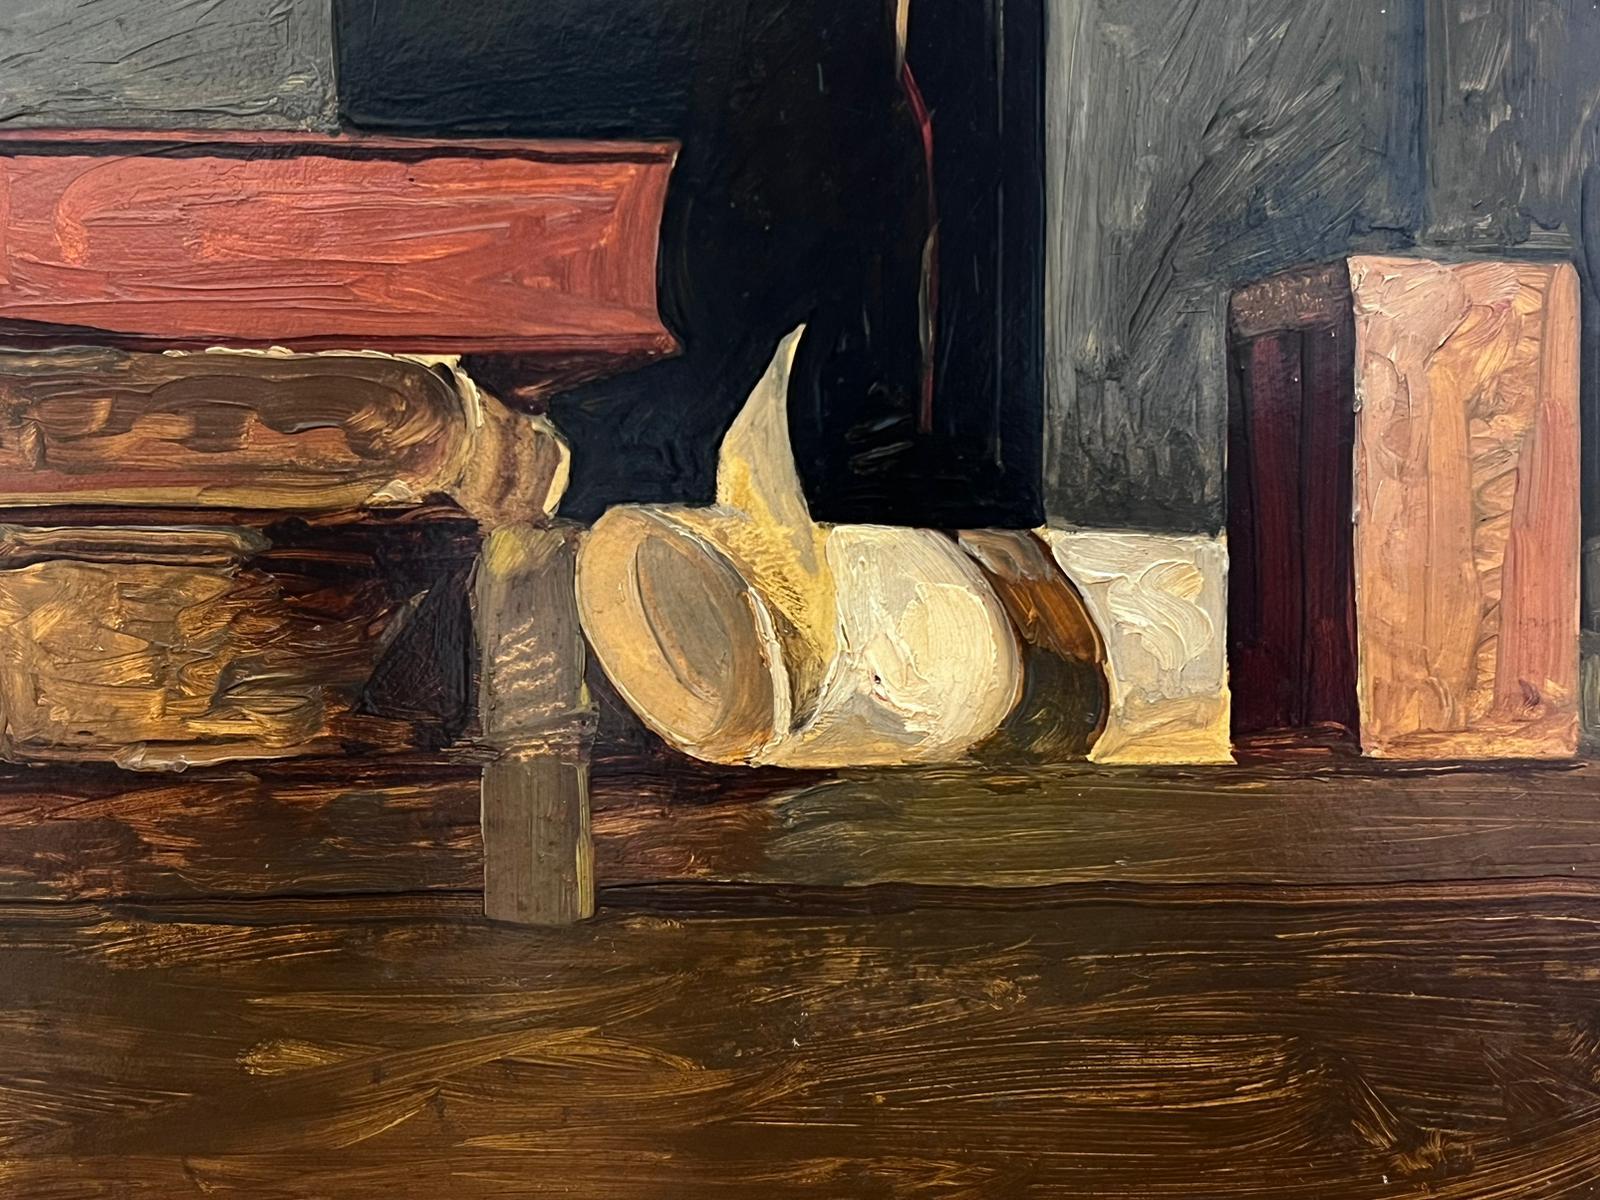 French School, mid 20th century
Still life of books
oil on board unframed
board: 10.5 x 13.75 inches
provenance: private collection, France
condition: very good and sound condition